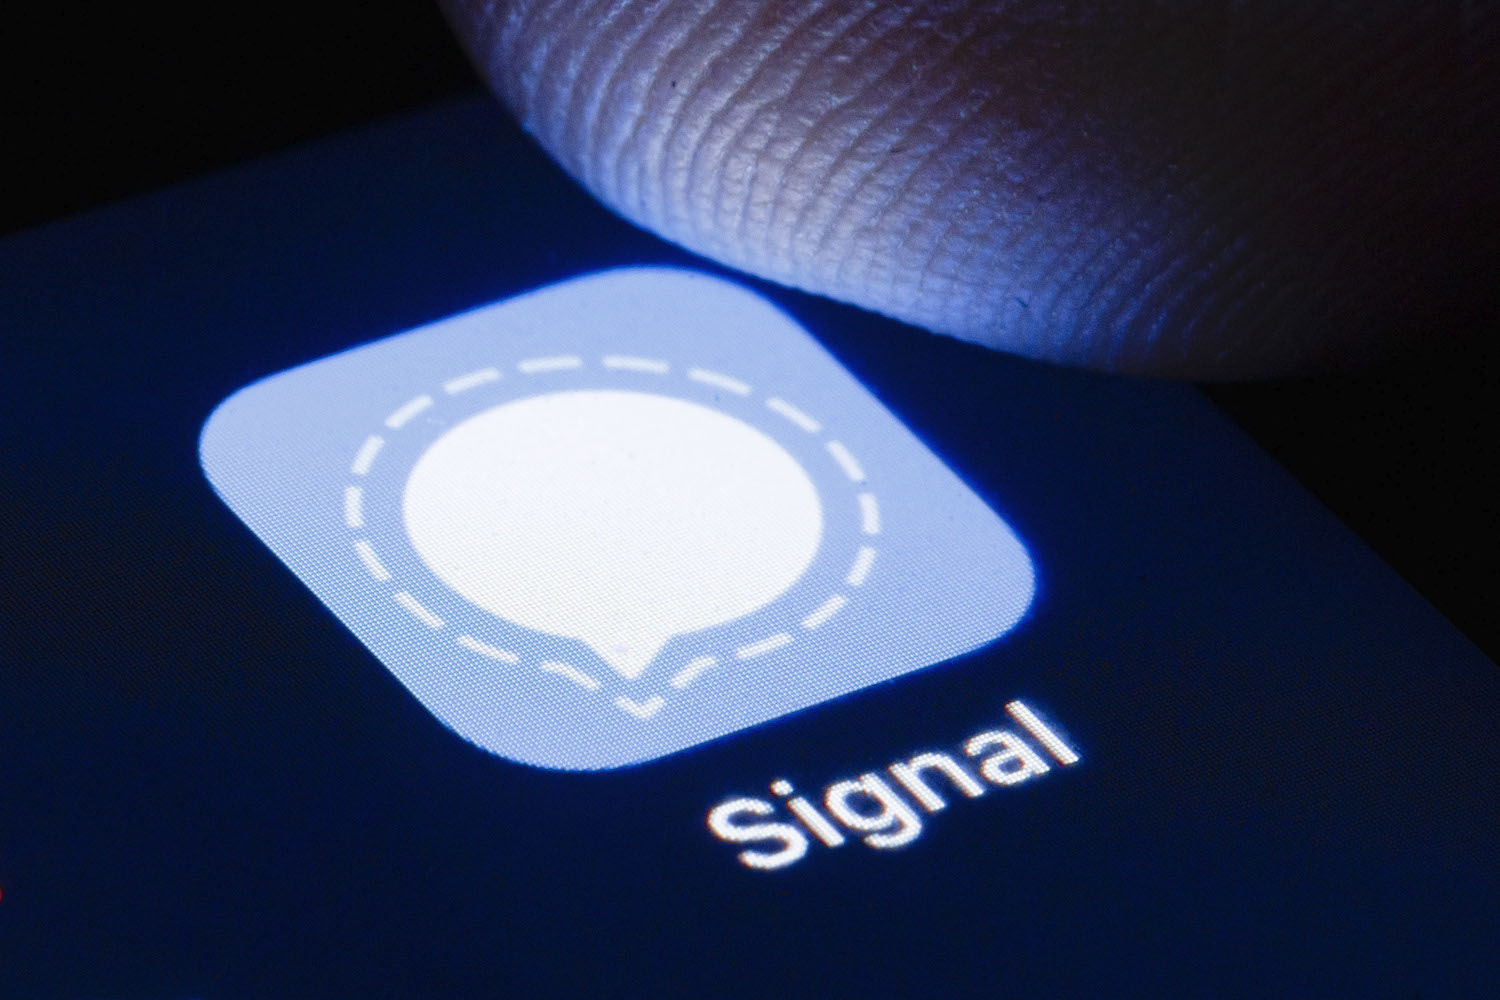 thousands users joined signal app